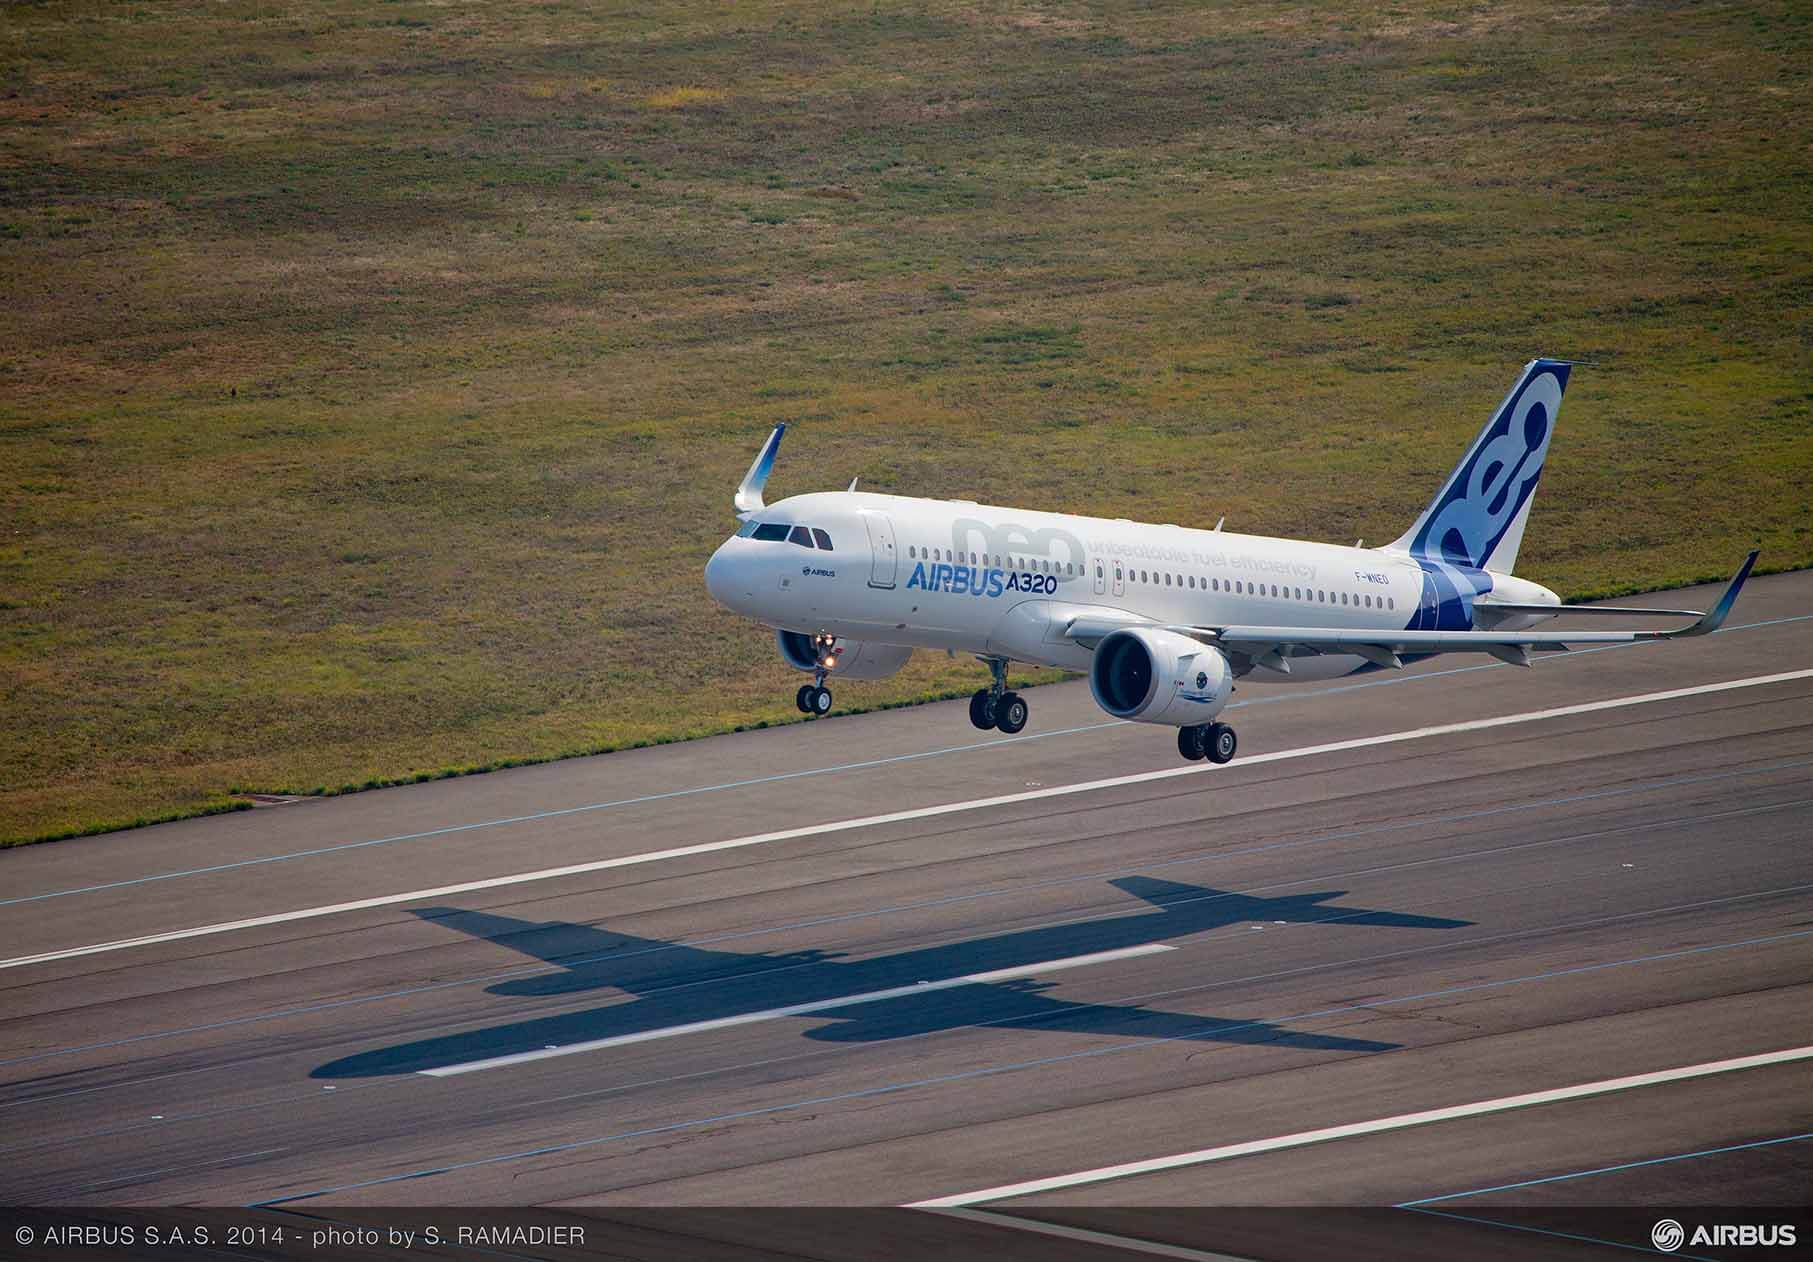 Sirius Aviation Capital acquires two A320